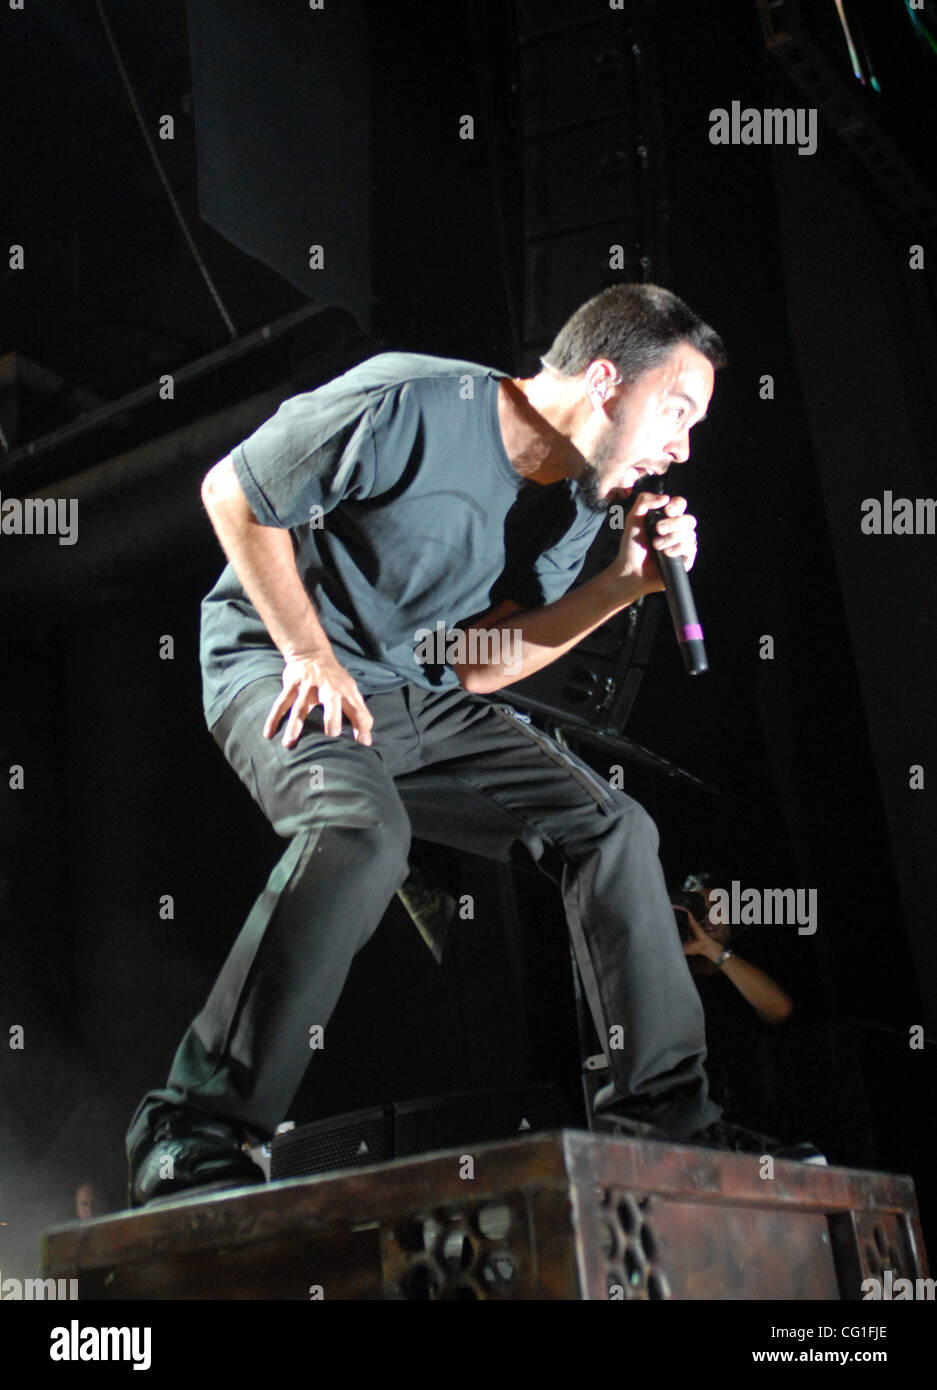 Aug. 13, 2007  Raleigh, NC; USA, Singer MIKE SHINODA of the band Linkin Park performs live as the 2007 Projekt Revolution Tour makes a stop at Walnut Creek Amphitheatre located in Raleigh.  Copyright 2007 Jason Moore. Mandatory Credit: Jason Moore Stock Photo